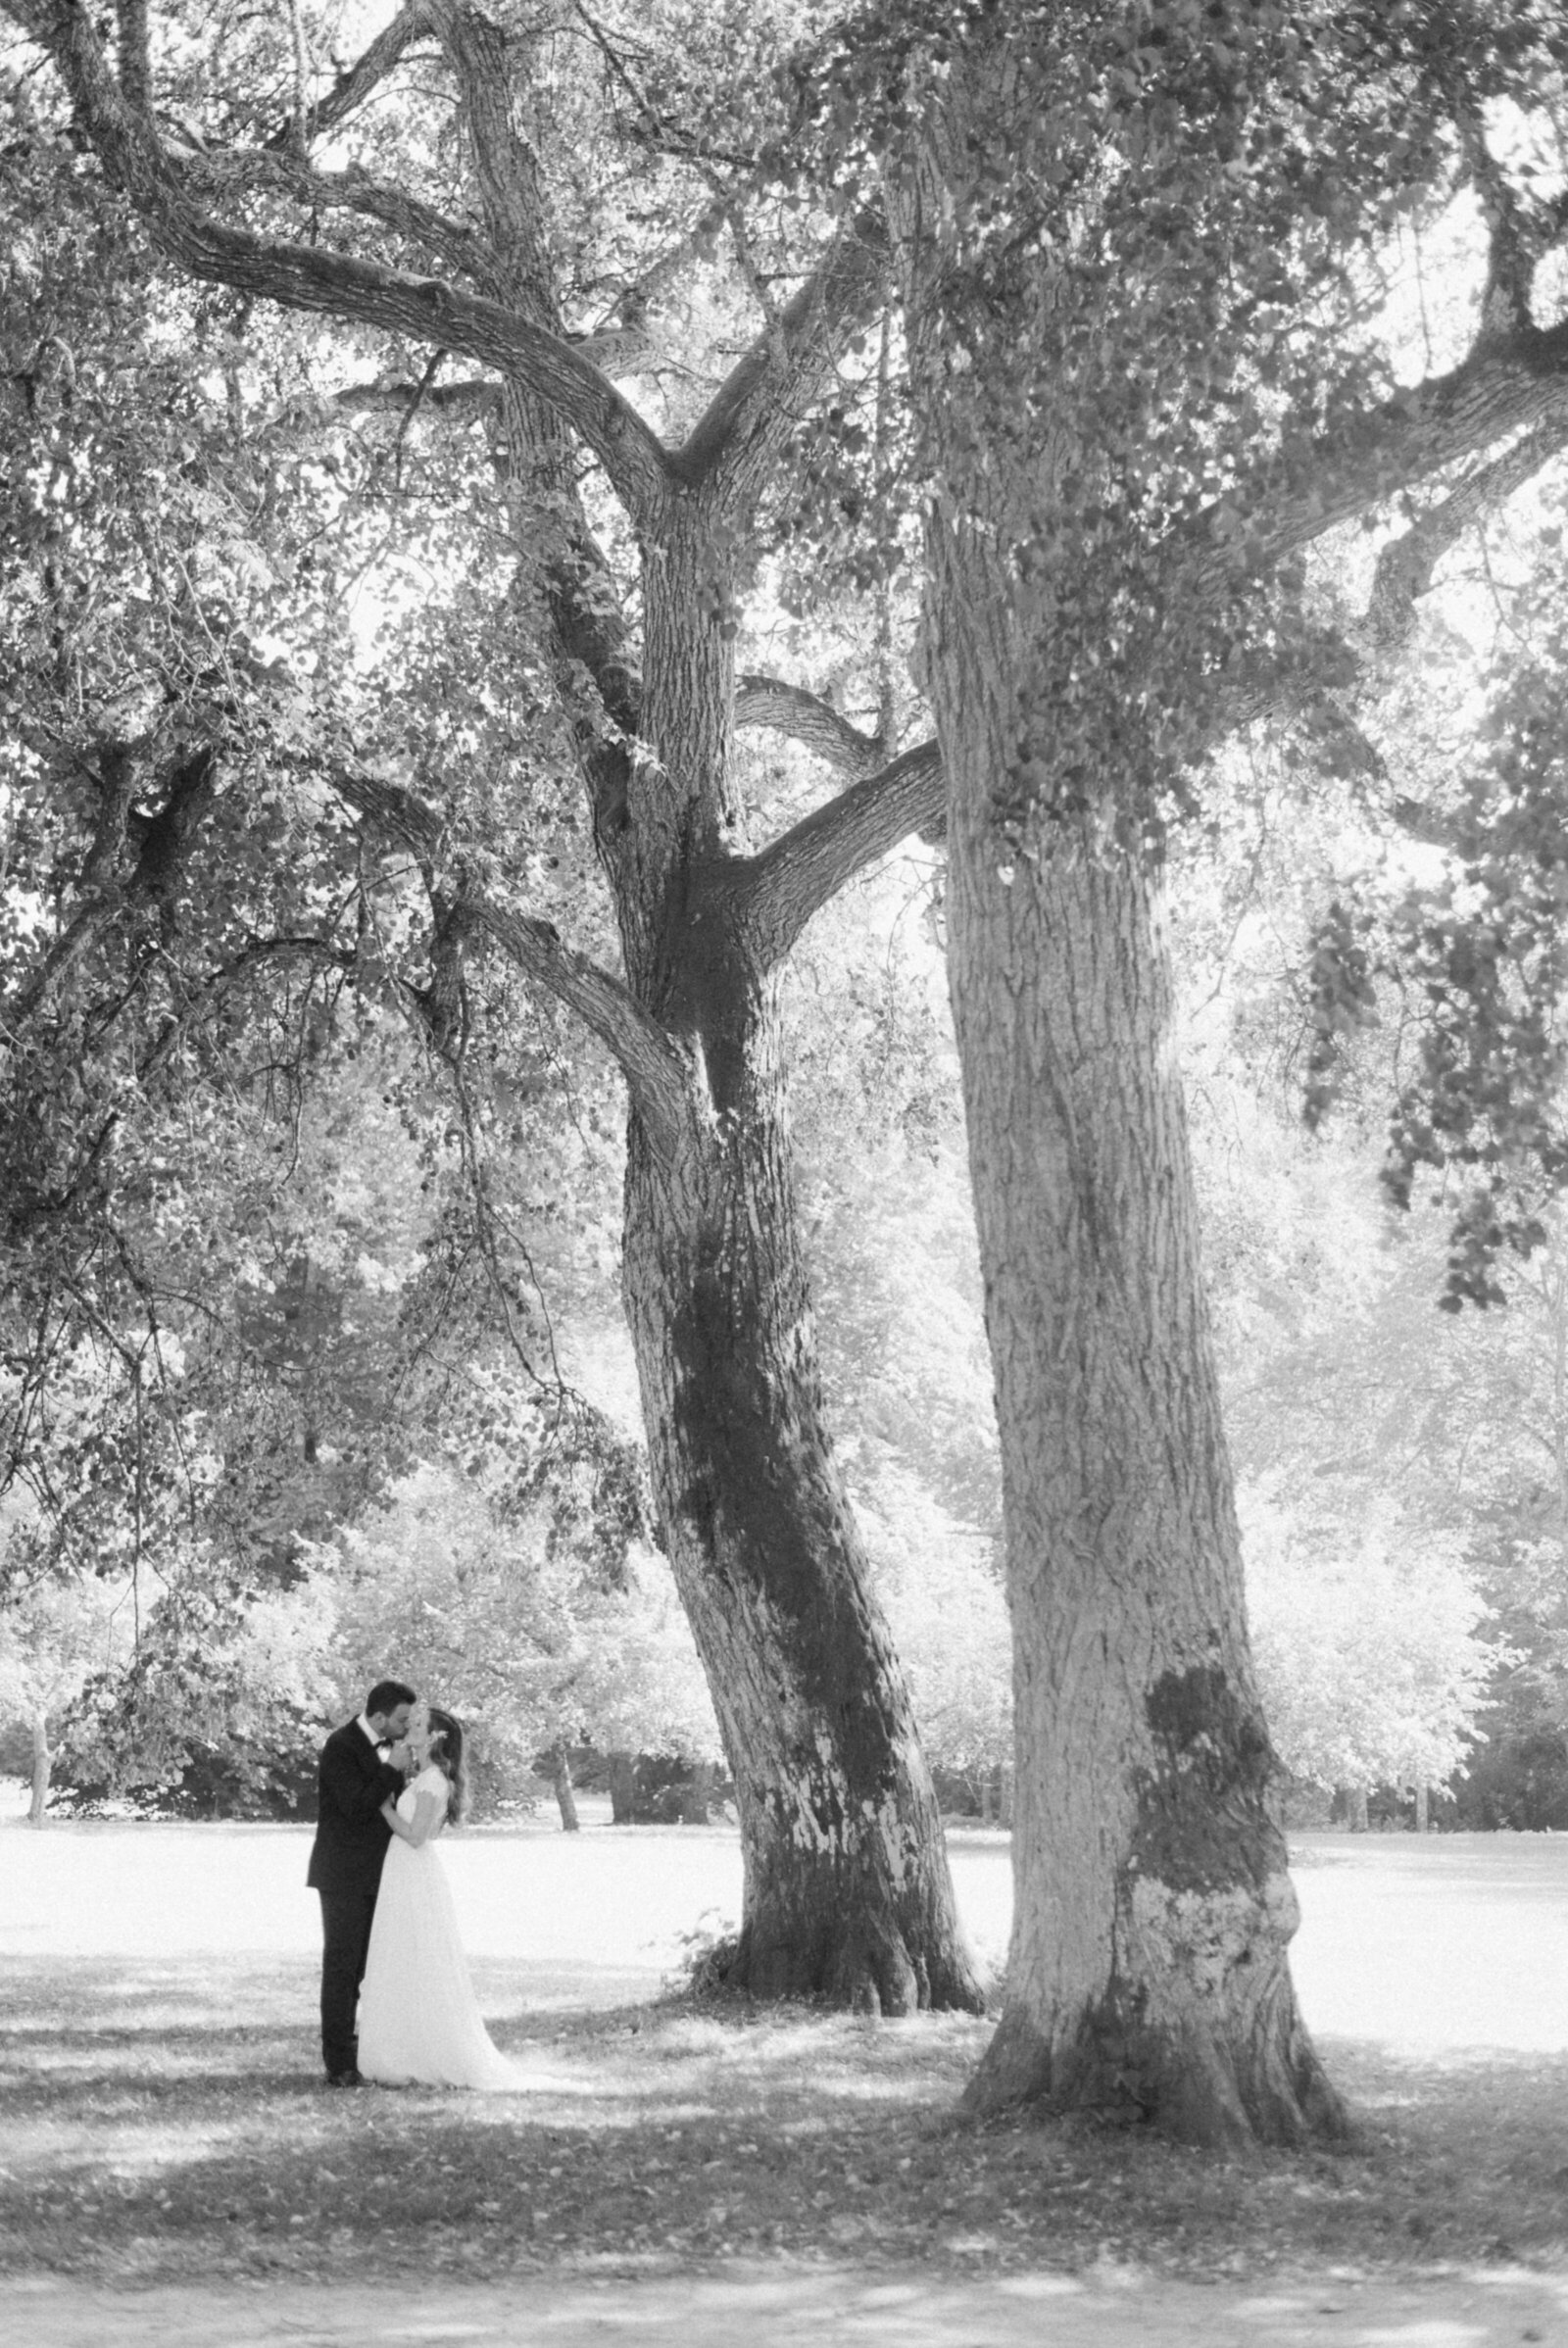 Wedding couple under a big tree in a black and white photograph shot by wedding photographer Hannika Gabrielsson.